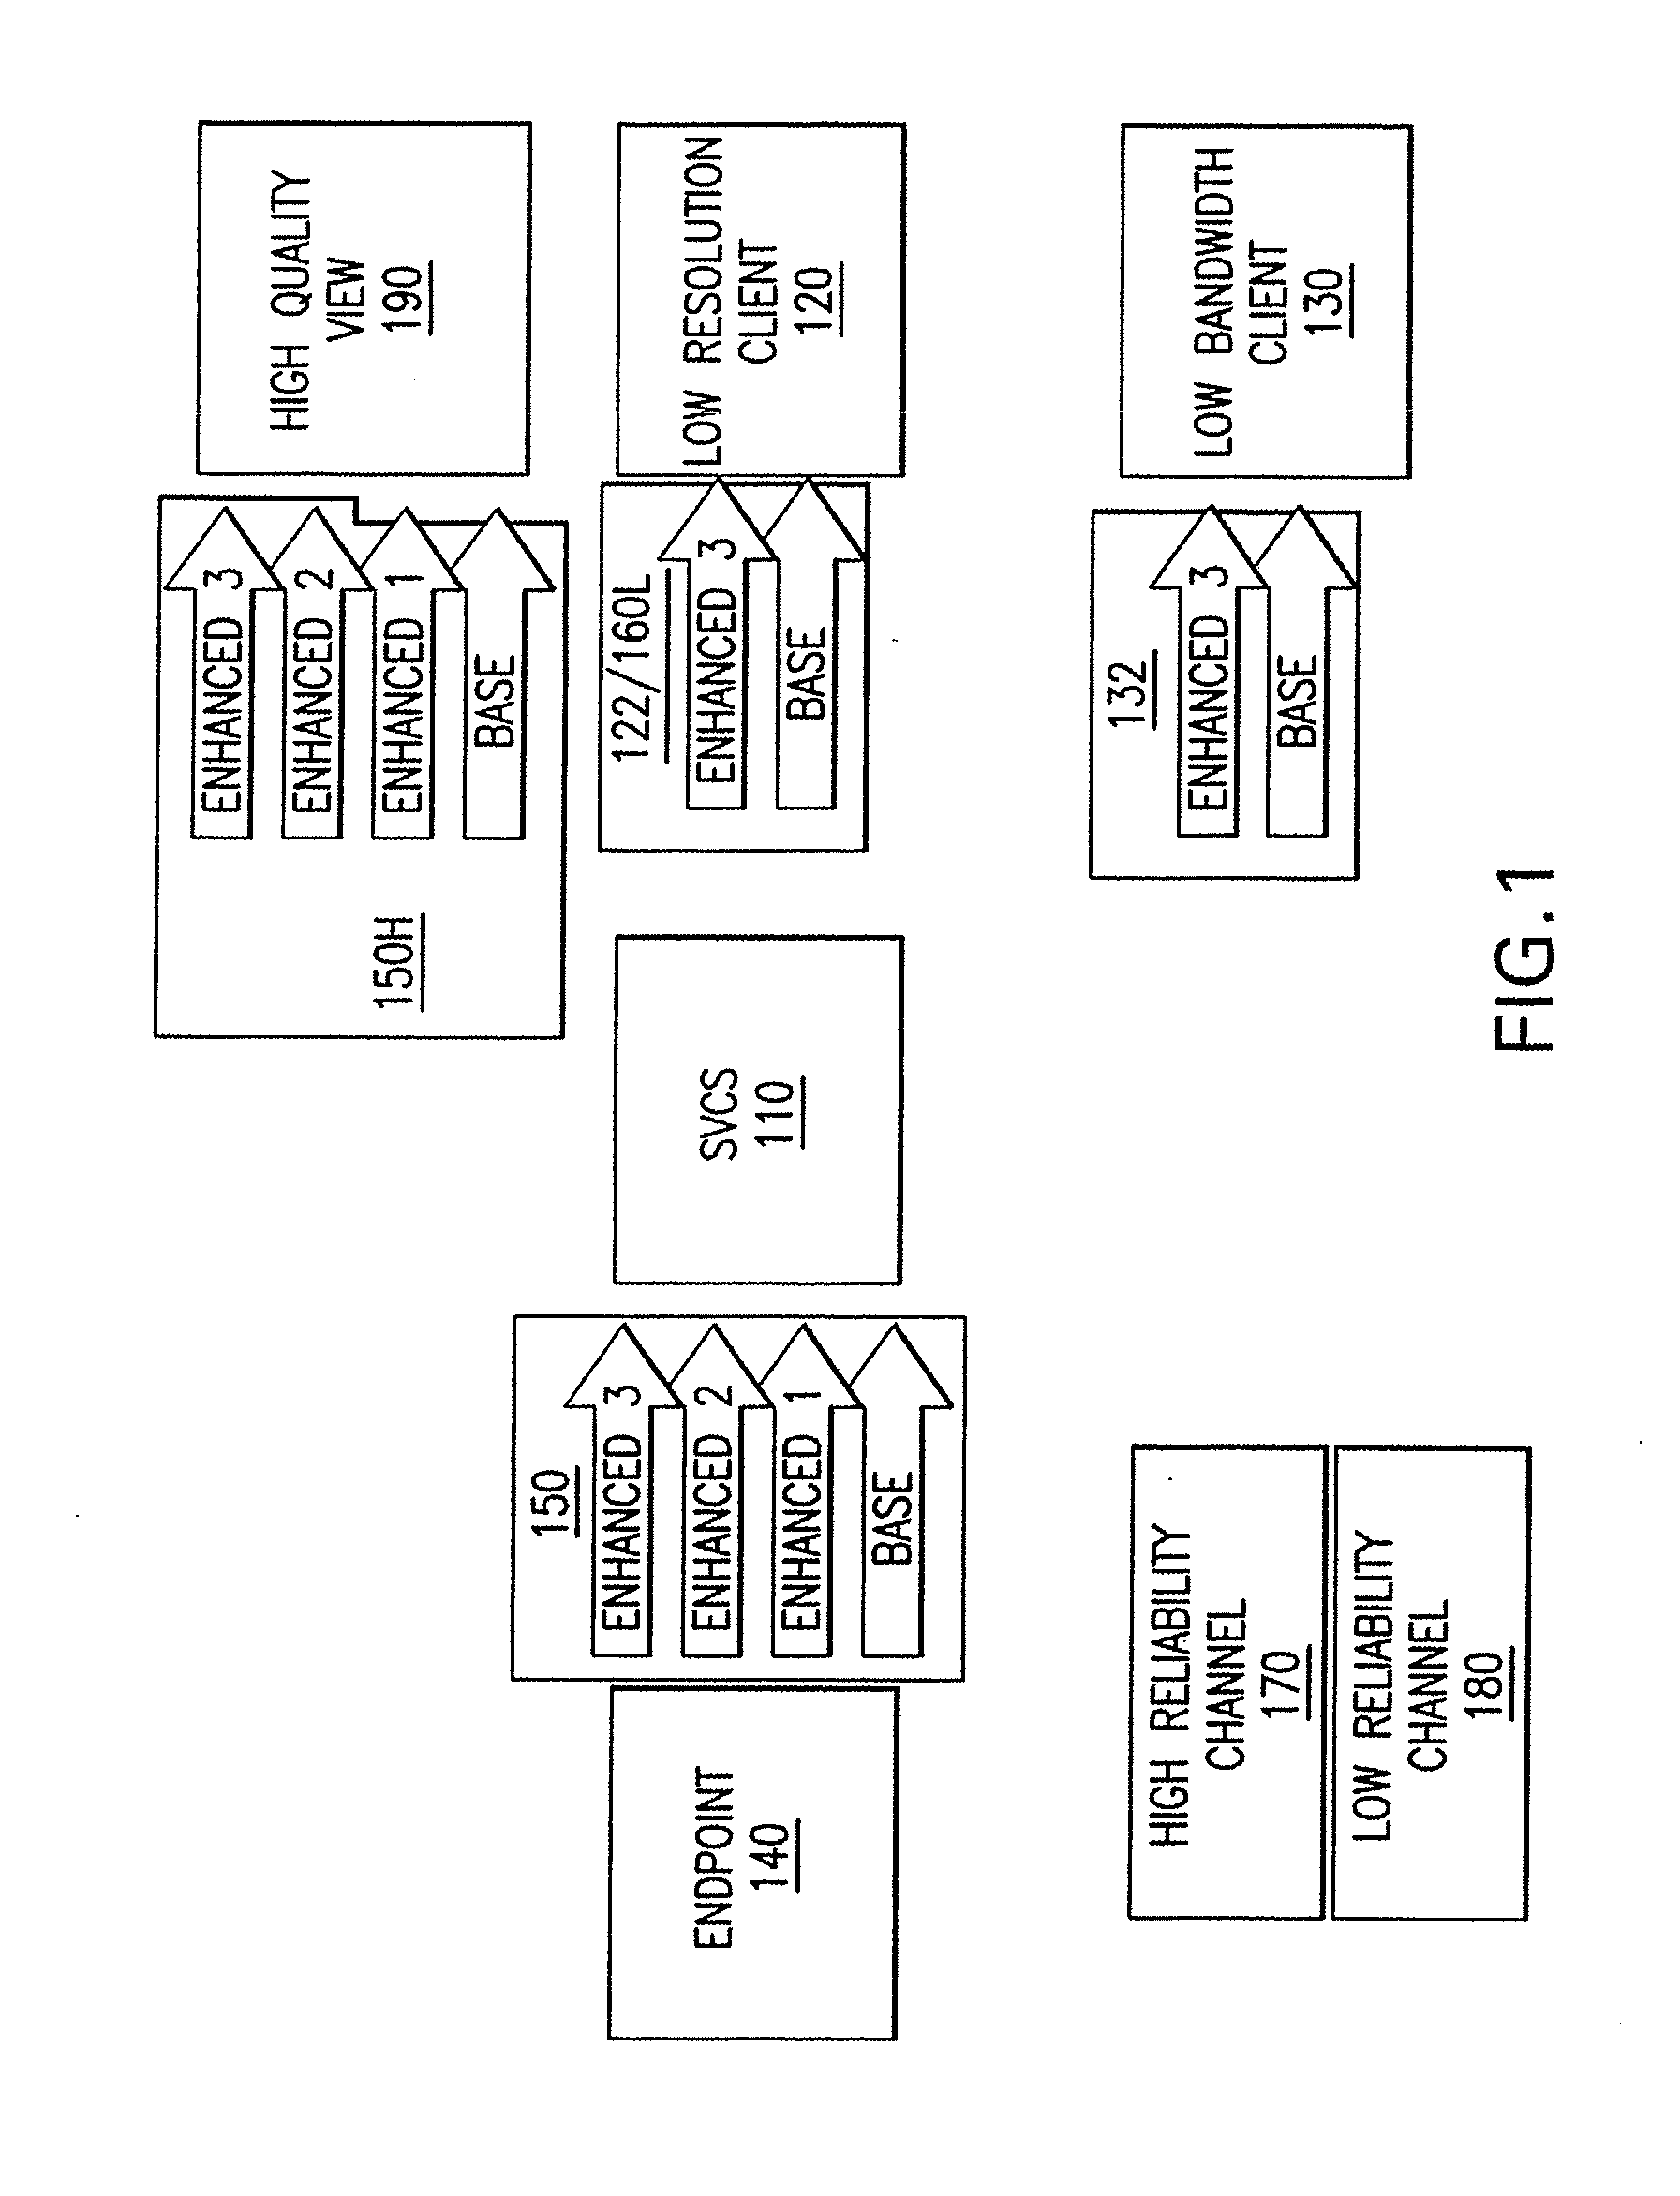 System and method for a conference server architecture for low delay and distributed conferencing applications